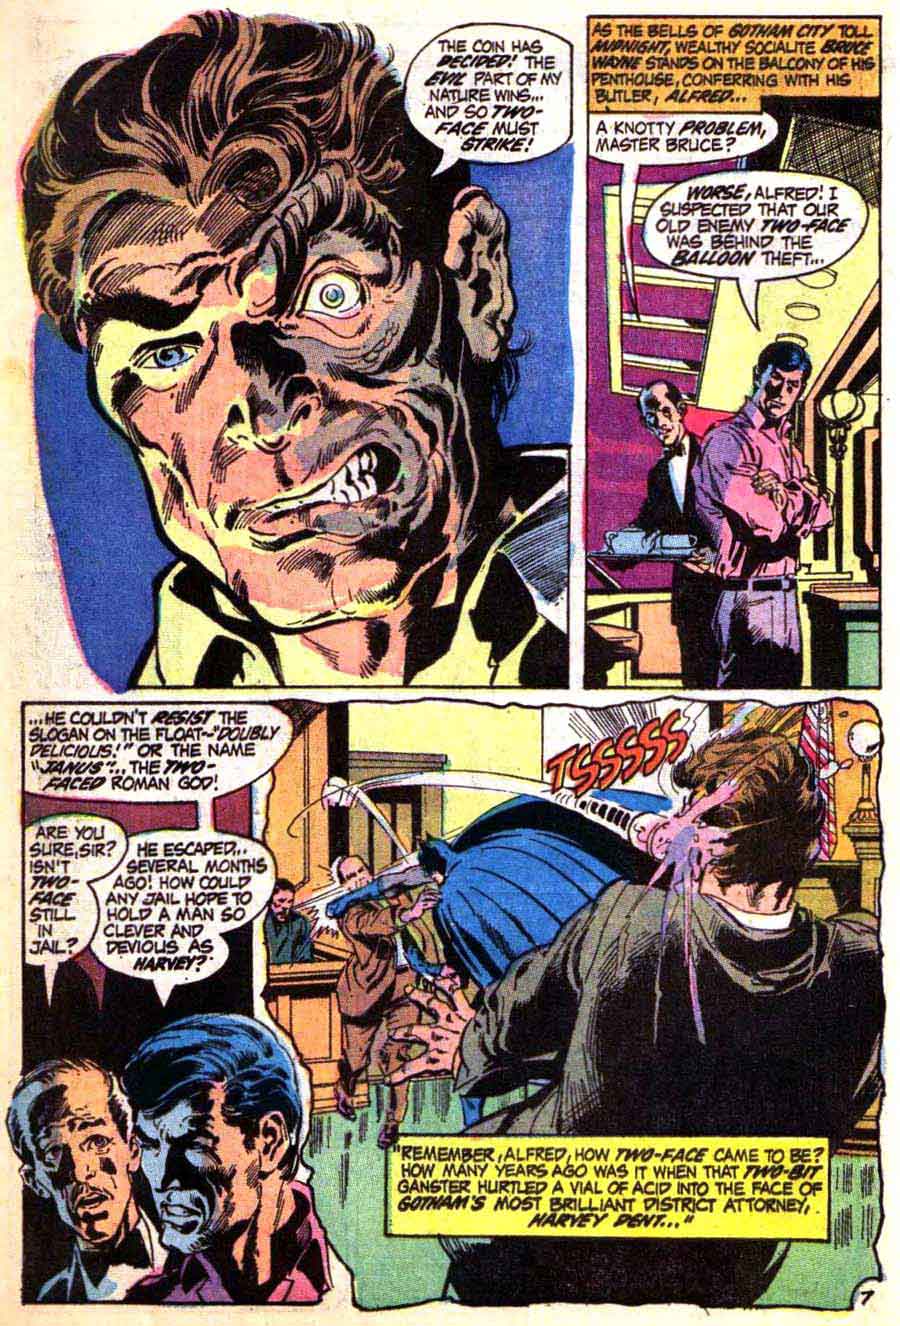 Batman #234 bronze age 1970s dc comic book page art by Neal Adams / 1st Two-Face